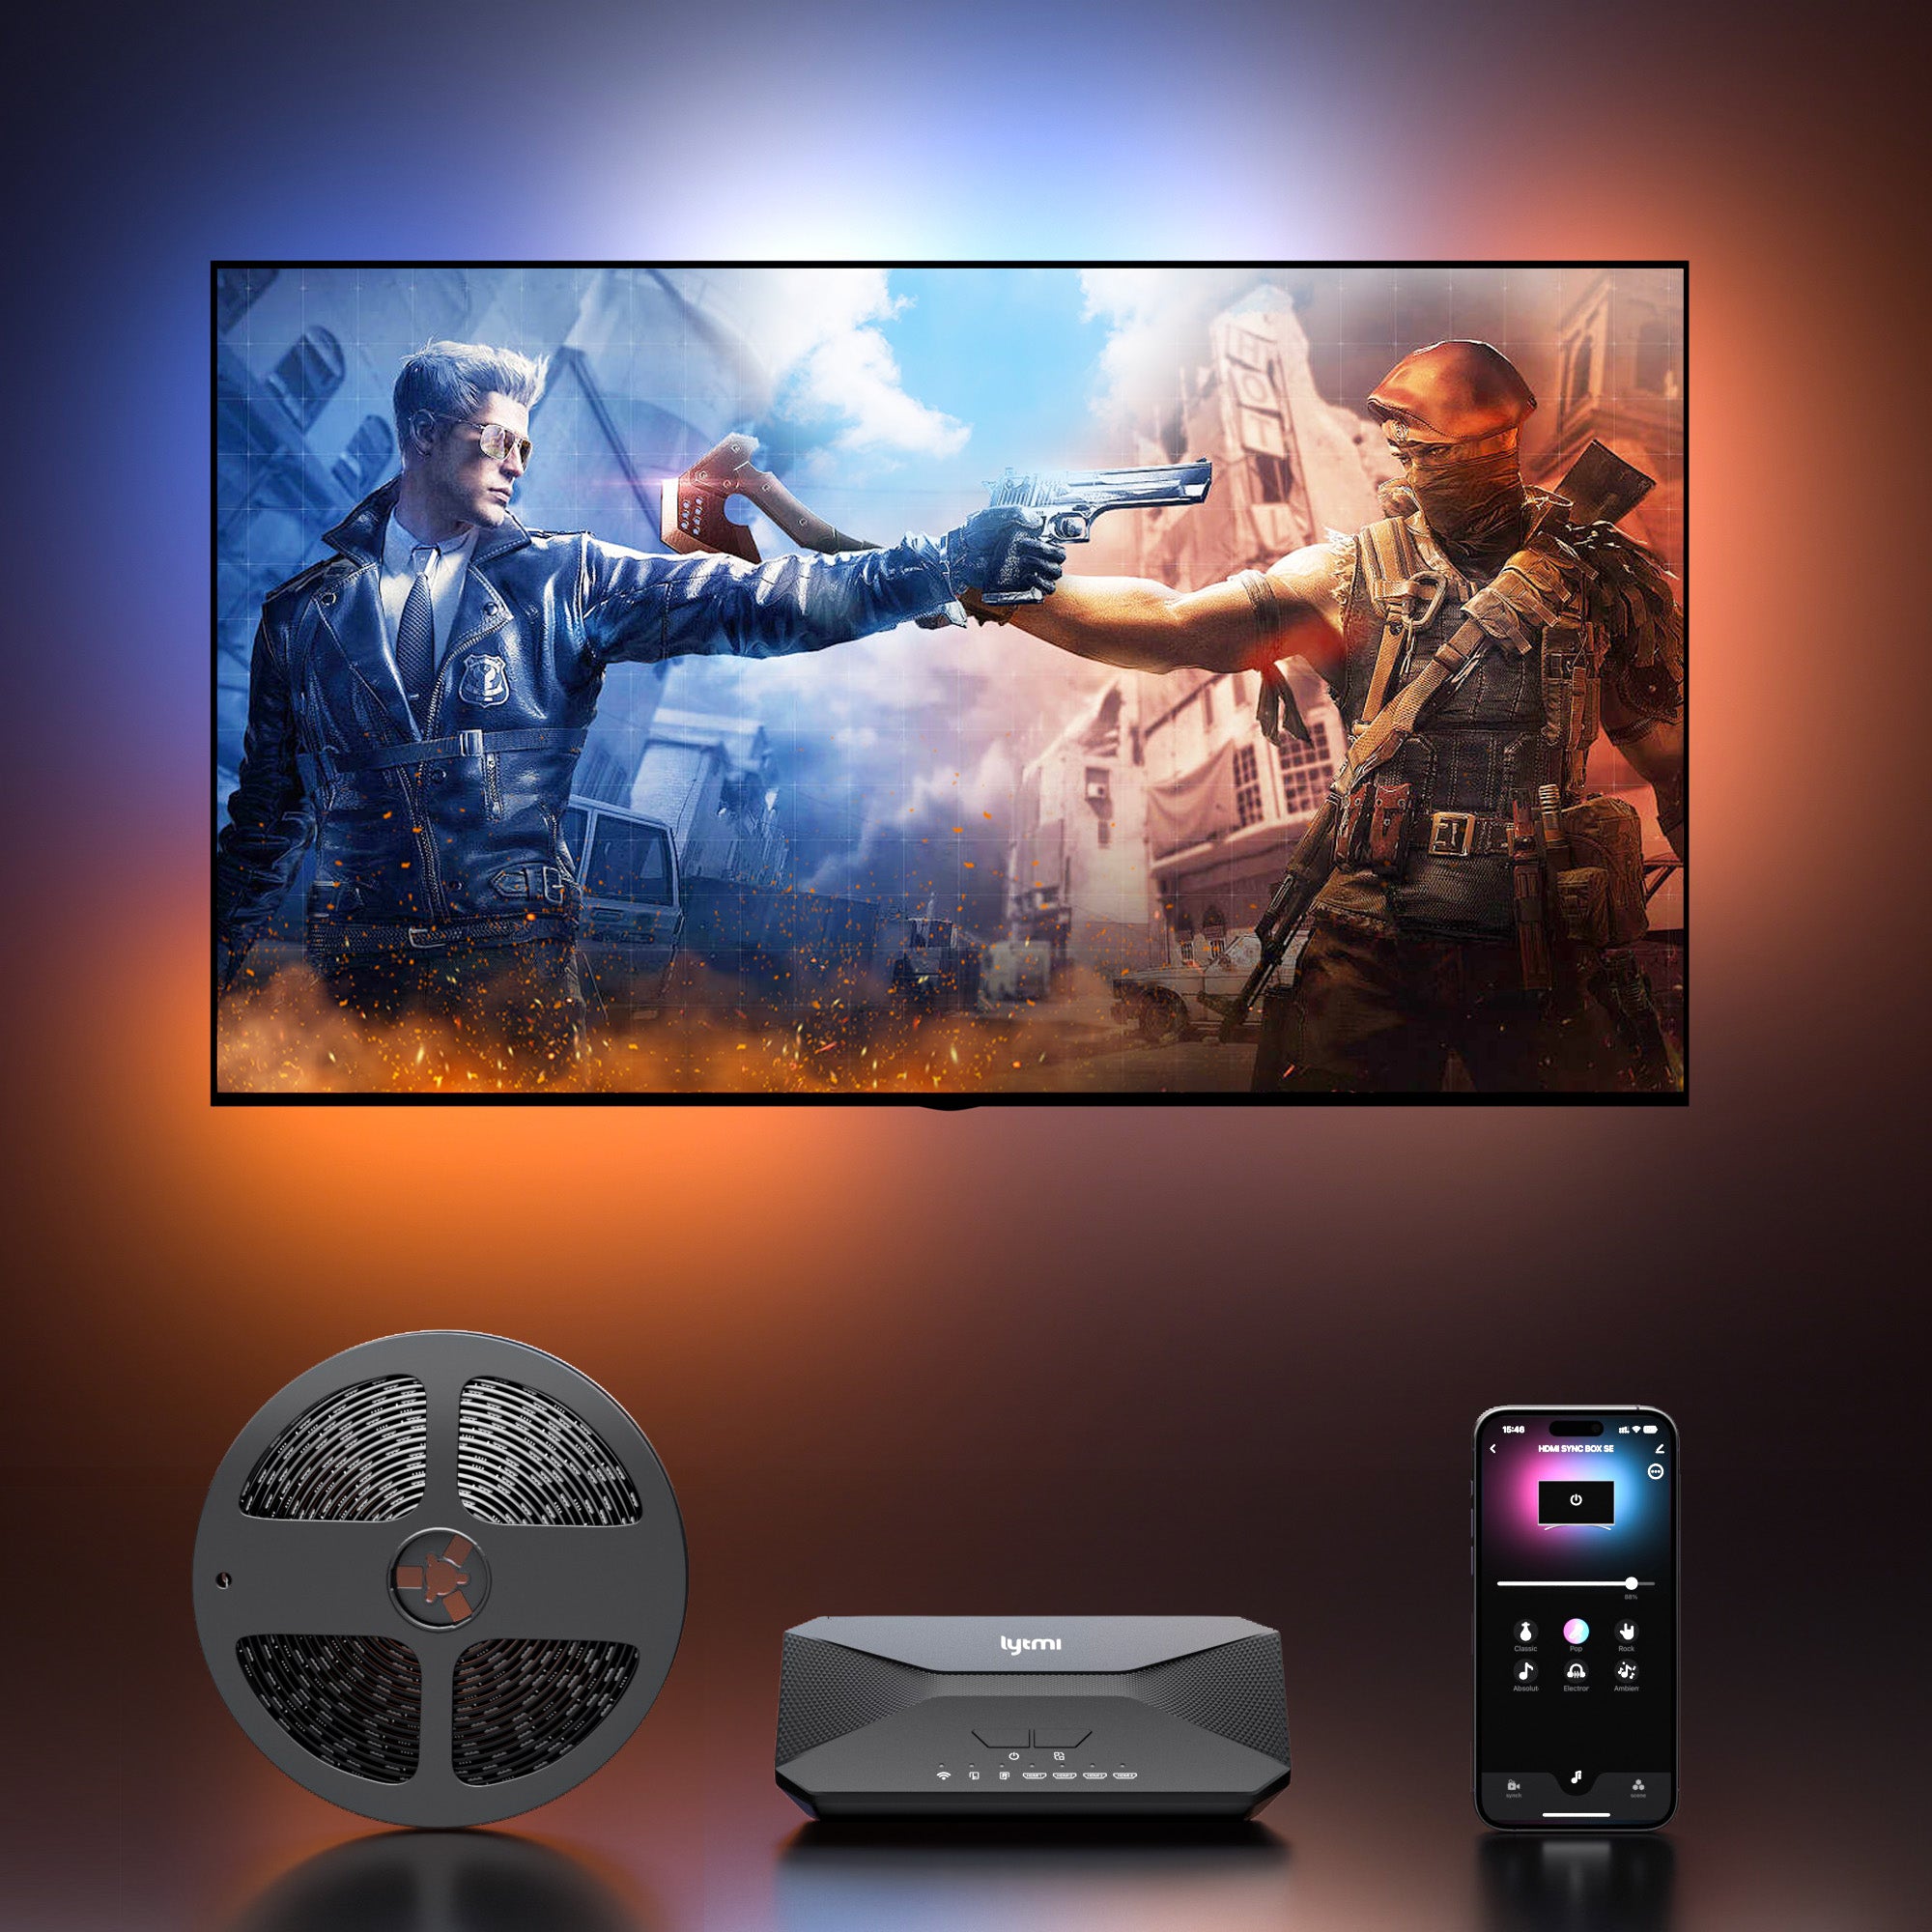 Ambient TV Fancy Led Backlight 4K HDMI 2.0 Device Sync Box And